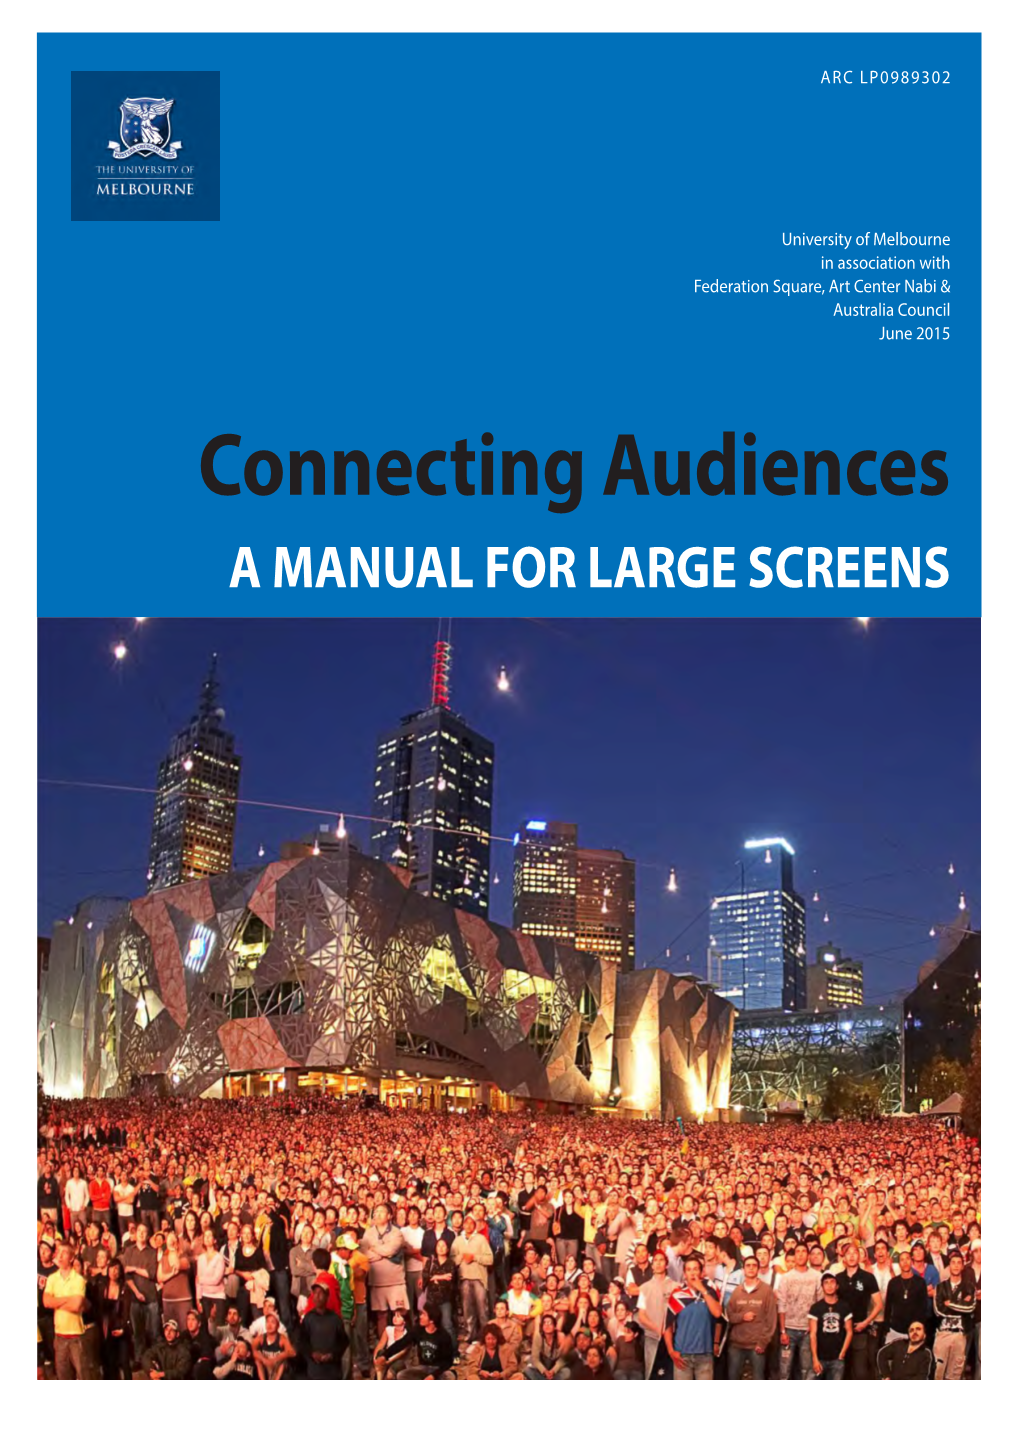 Connecting Audiences Report